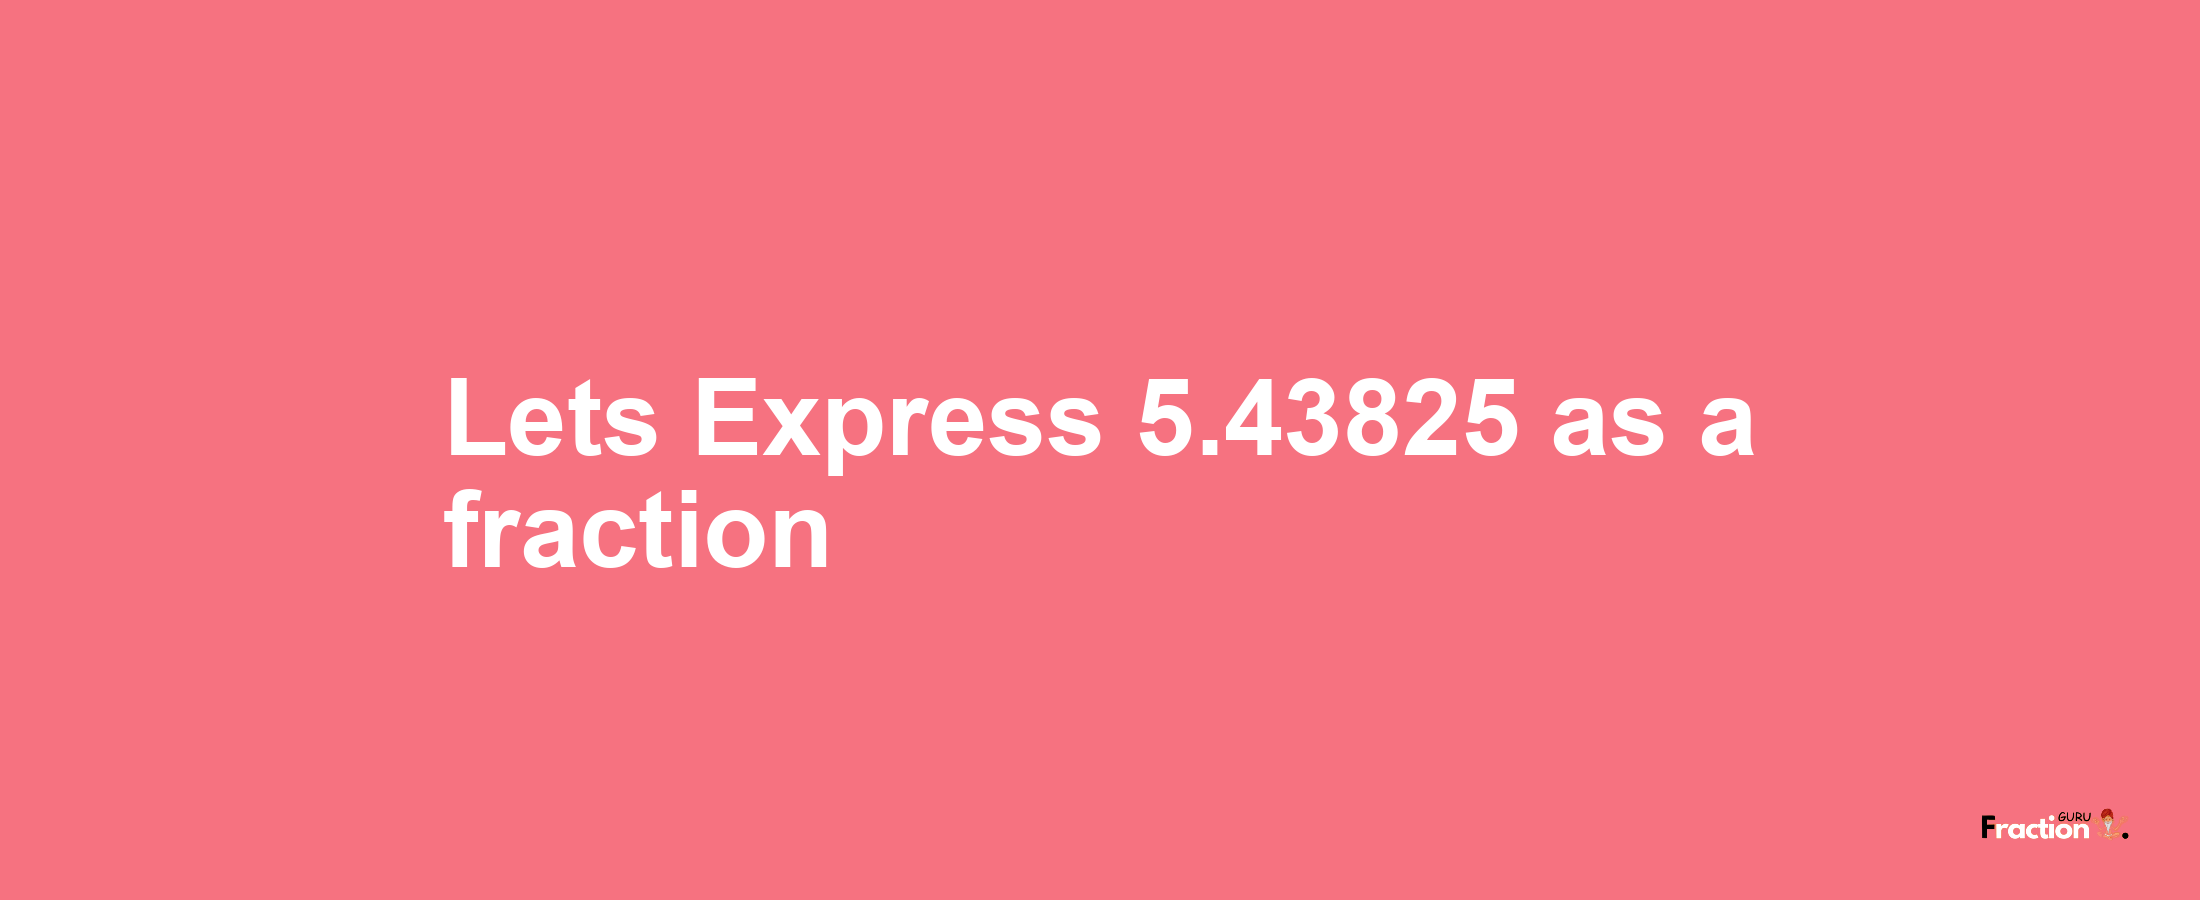 Lets Express 5.43825 as afraction